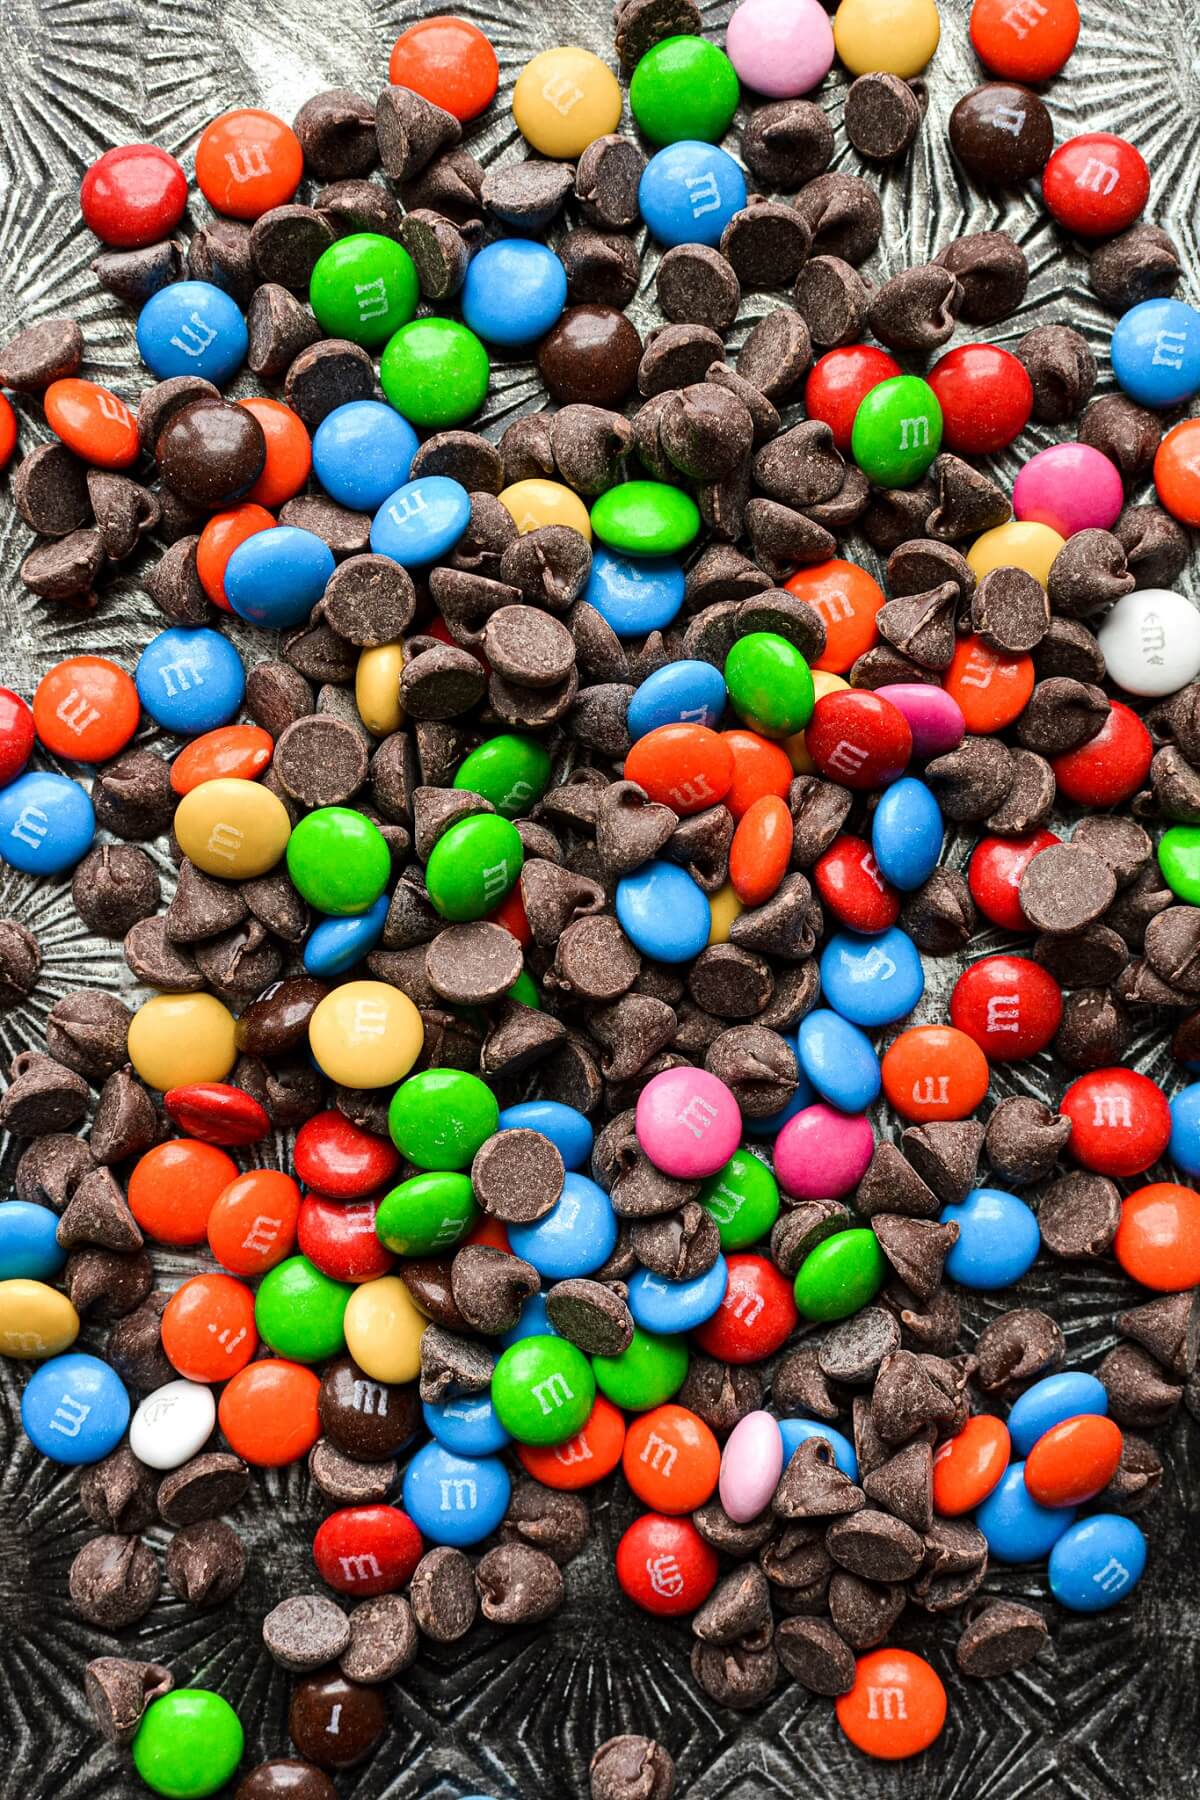 Chocolate chips and M&Ms.